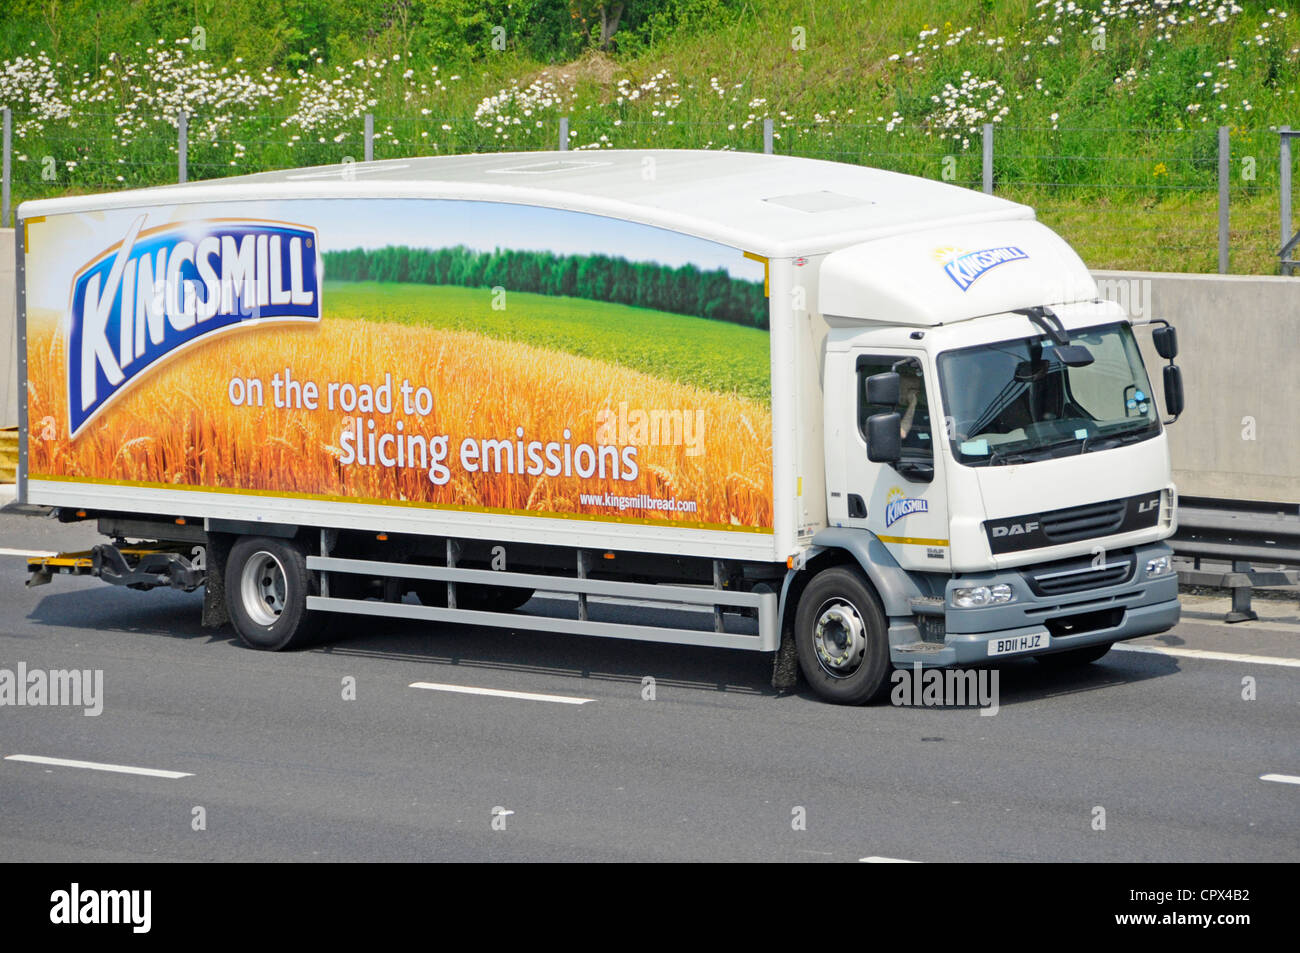 Advertising for Kingsmill bread a brand owned by Associated British Foods on side of streamlined delivery lorry truck with driver cab on UK motorway Stock Photo